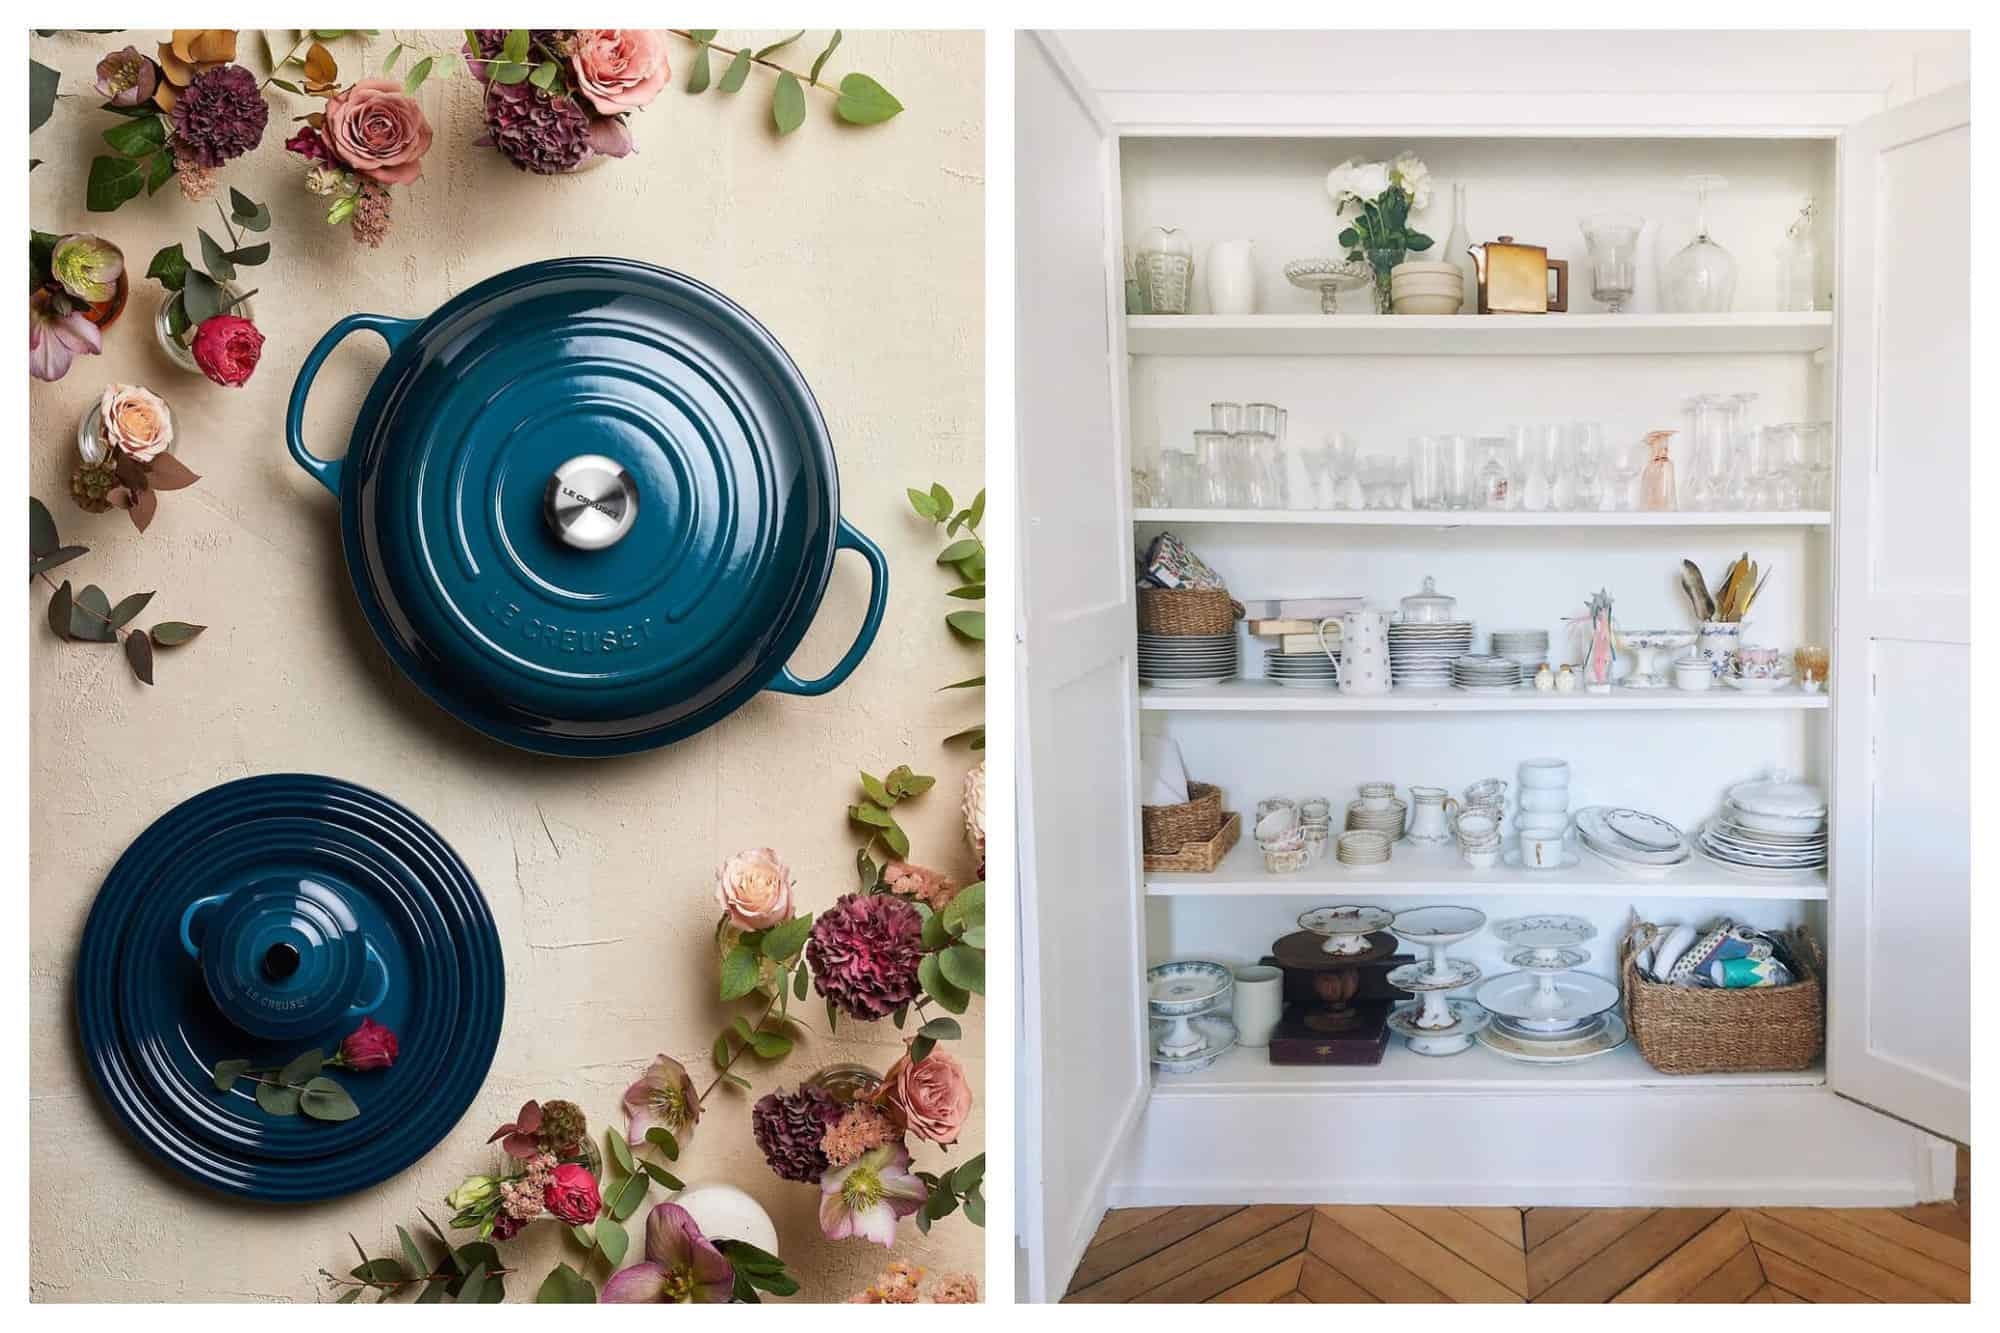 Left: A large Le Creuset blue pot is pictured, with a smaller one next to it. There are roses and other flowers surrounding the pots. Right: A large white kitchen cabinet is pictures filled with simple dishware including a variety of drinking glasses, plates, platters, bowls and teacups.